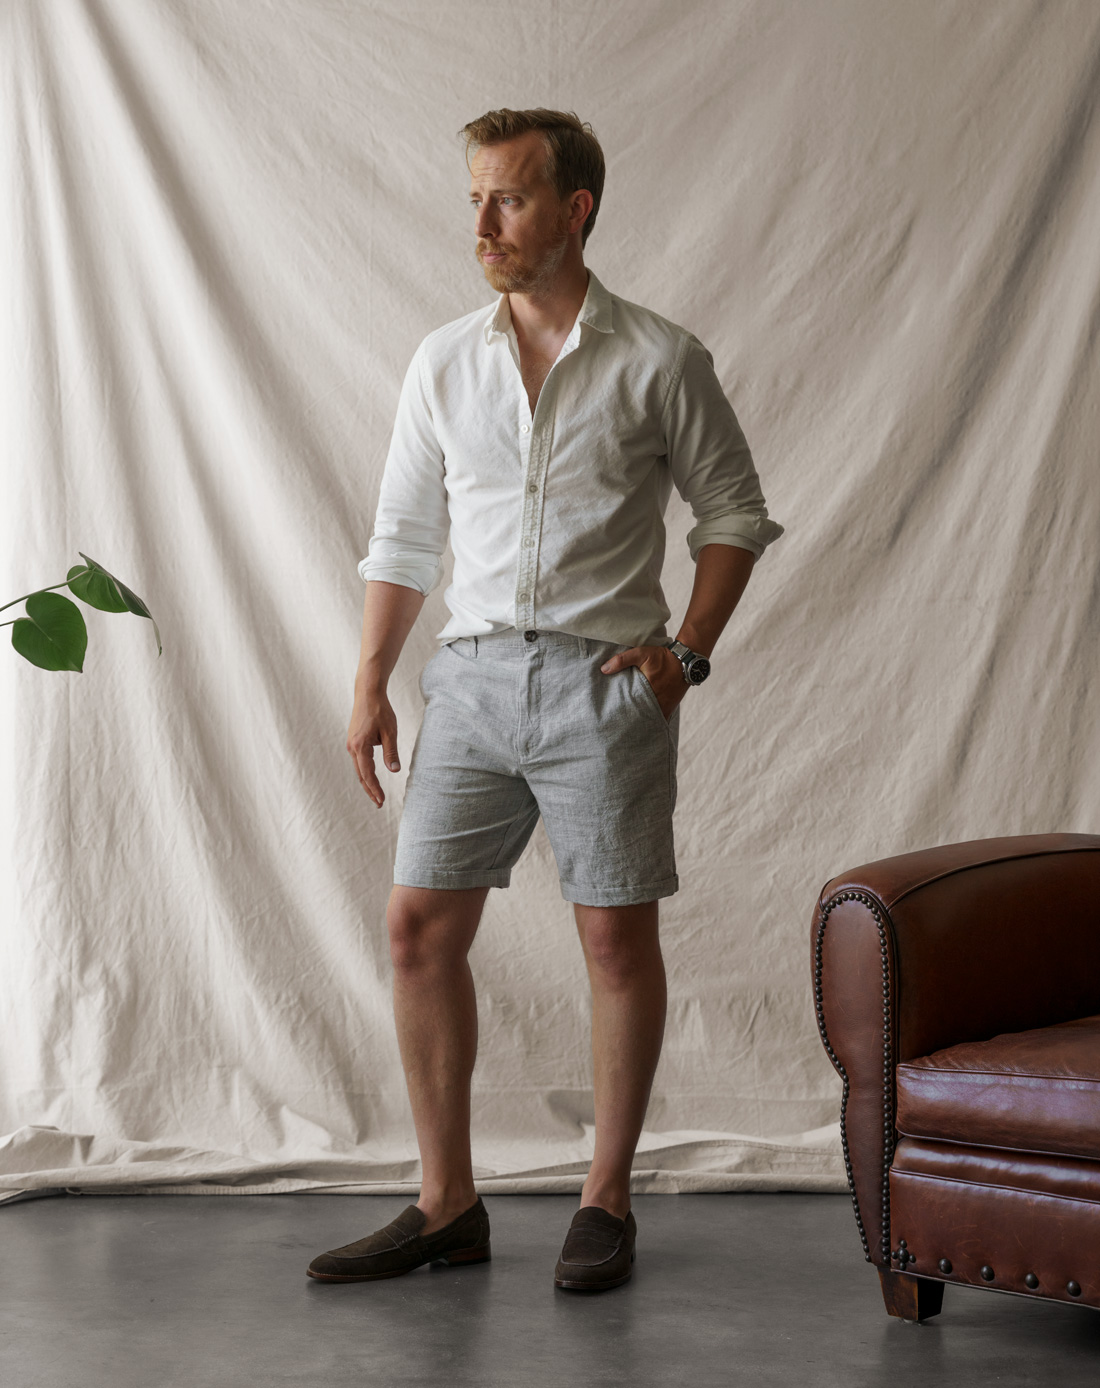 Goodfellow & co men's shorts - men's summer outfit with linen shorts, white shirt, and brown loafers